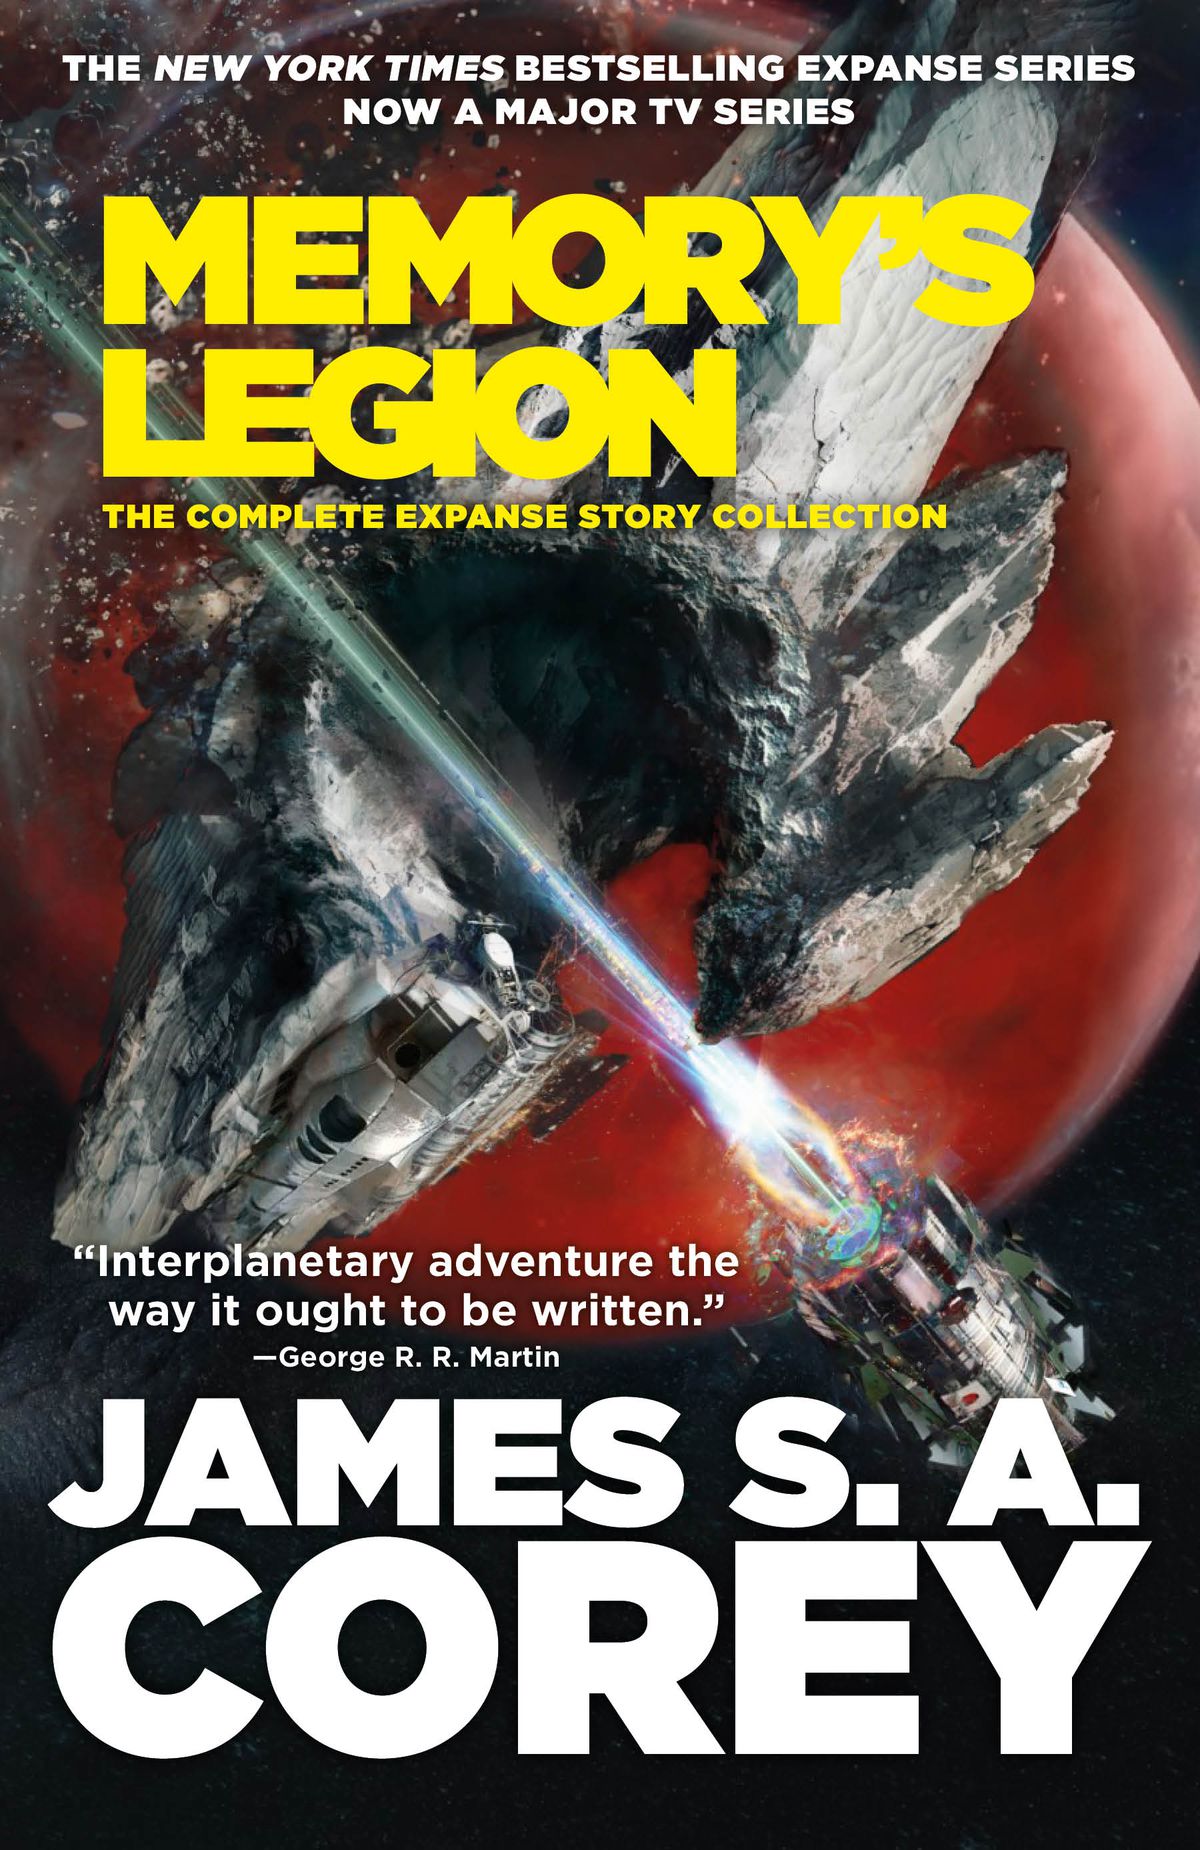 The cover of Memory’s Legion showing a space ship cutting through an asteroid